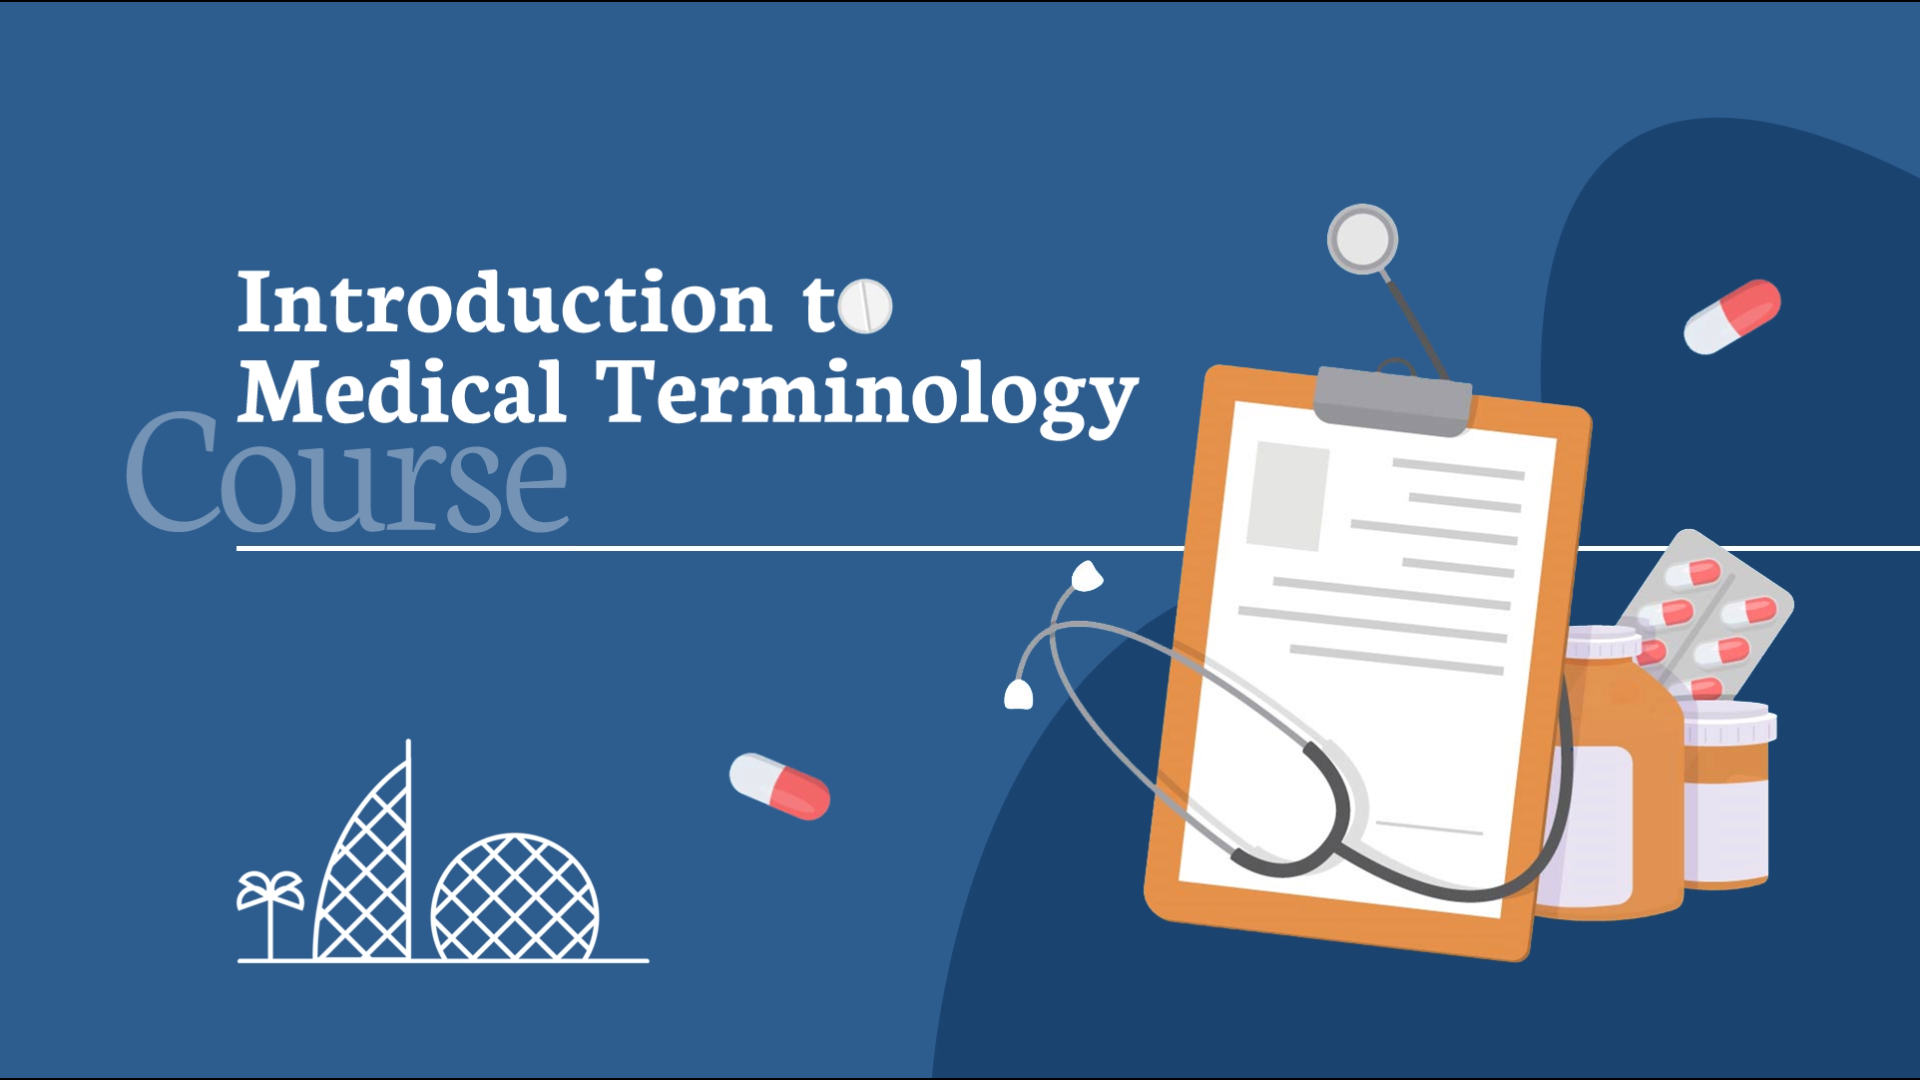 Introduction to Medical Terminology Course